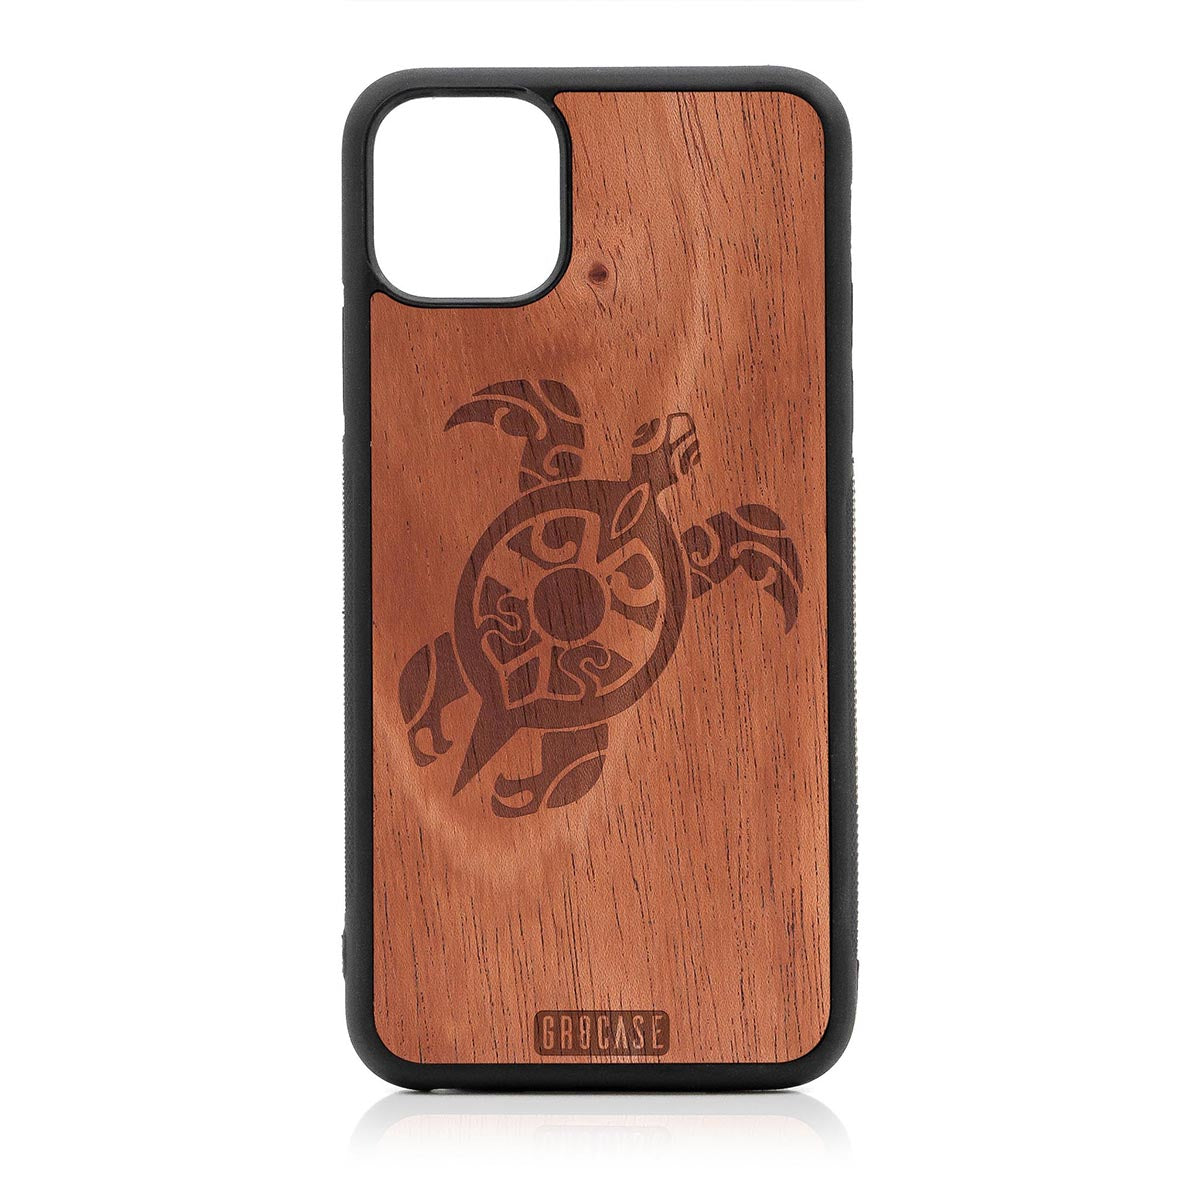 Turtle Design Wood Case For iPhone 11 Pro Max